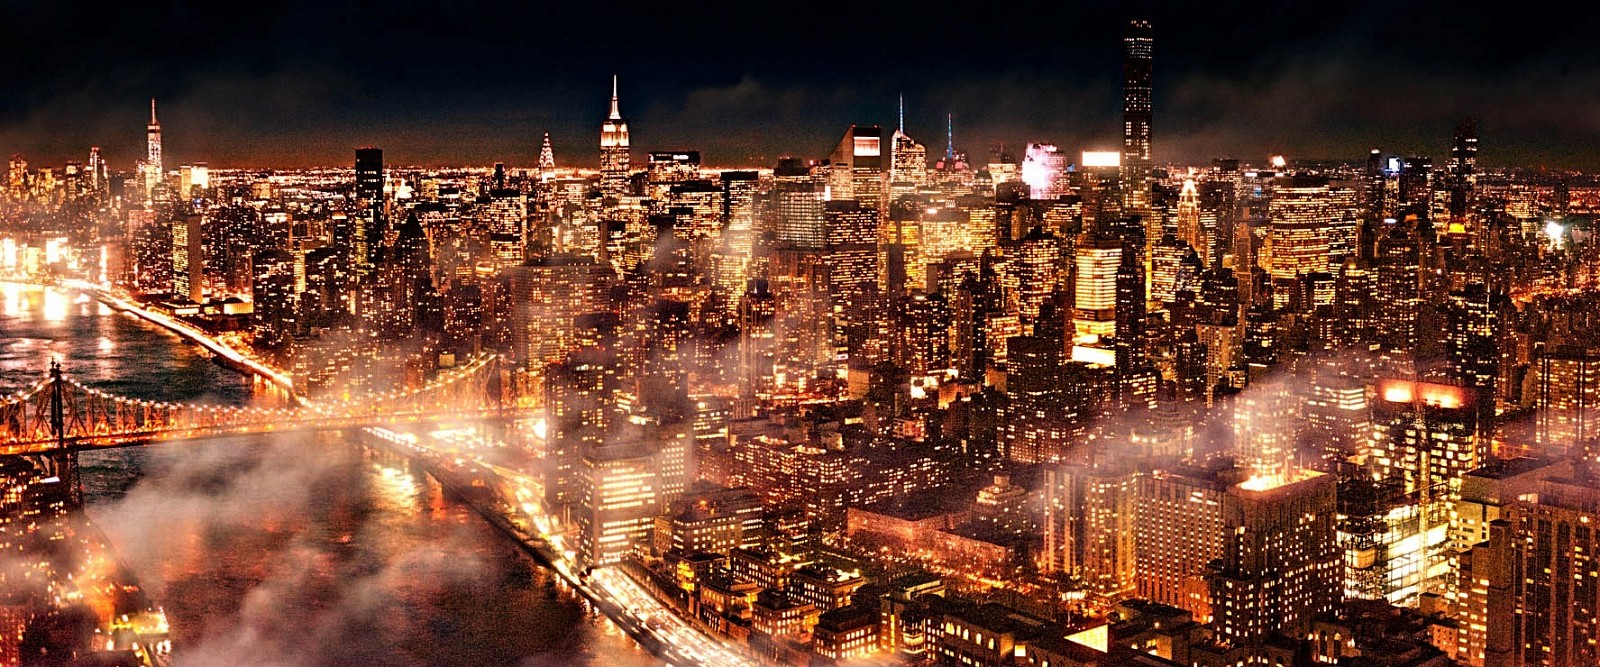 David Drebin, Electric City, 2016
Digital C Print, 30 x 72 inches Also available in 20 x 48 inches and 40 x 96 inches